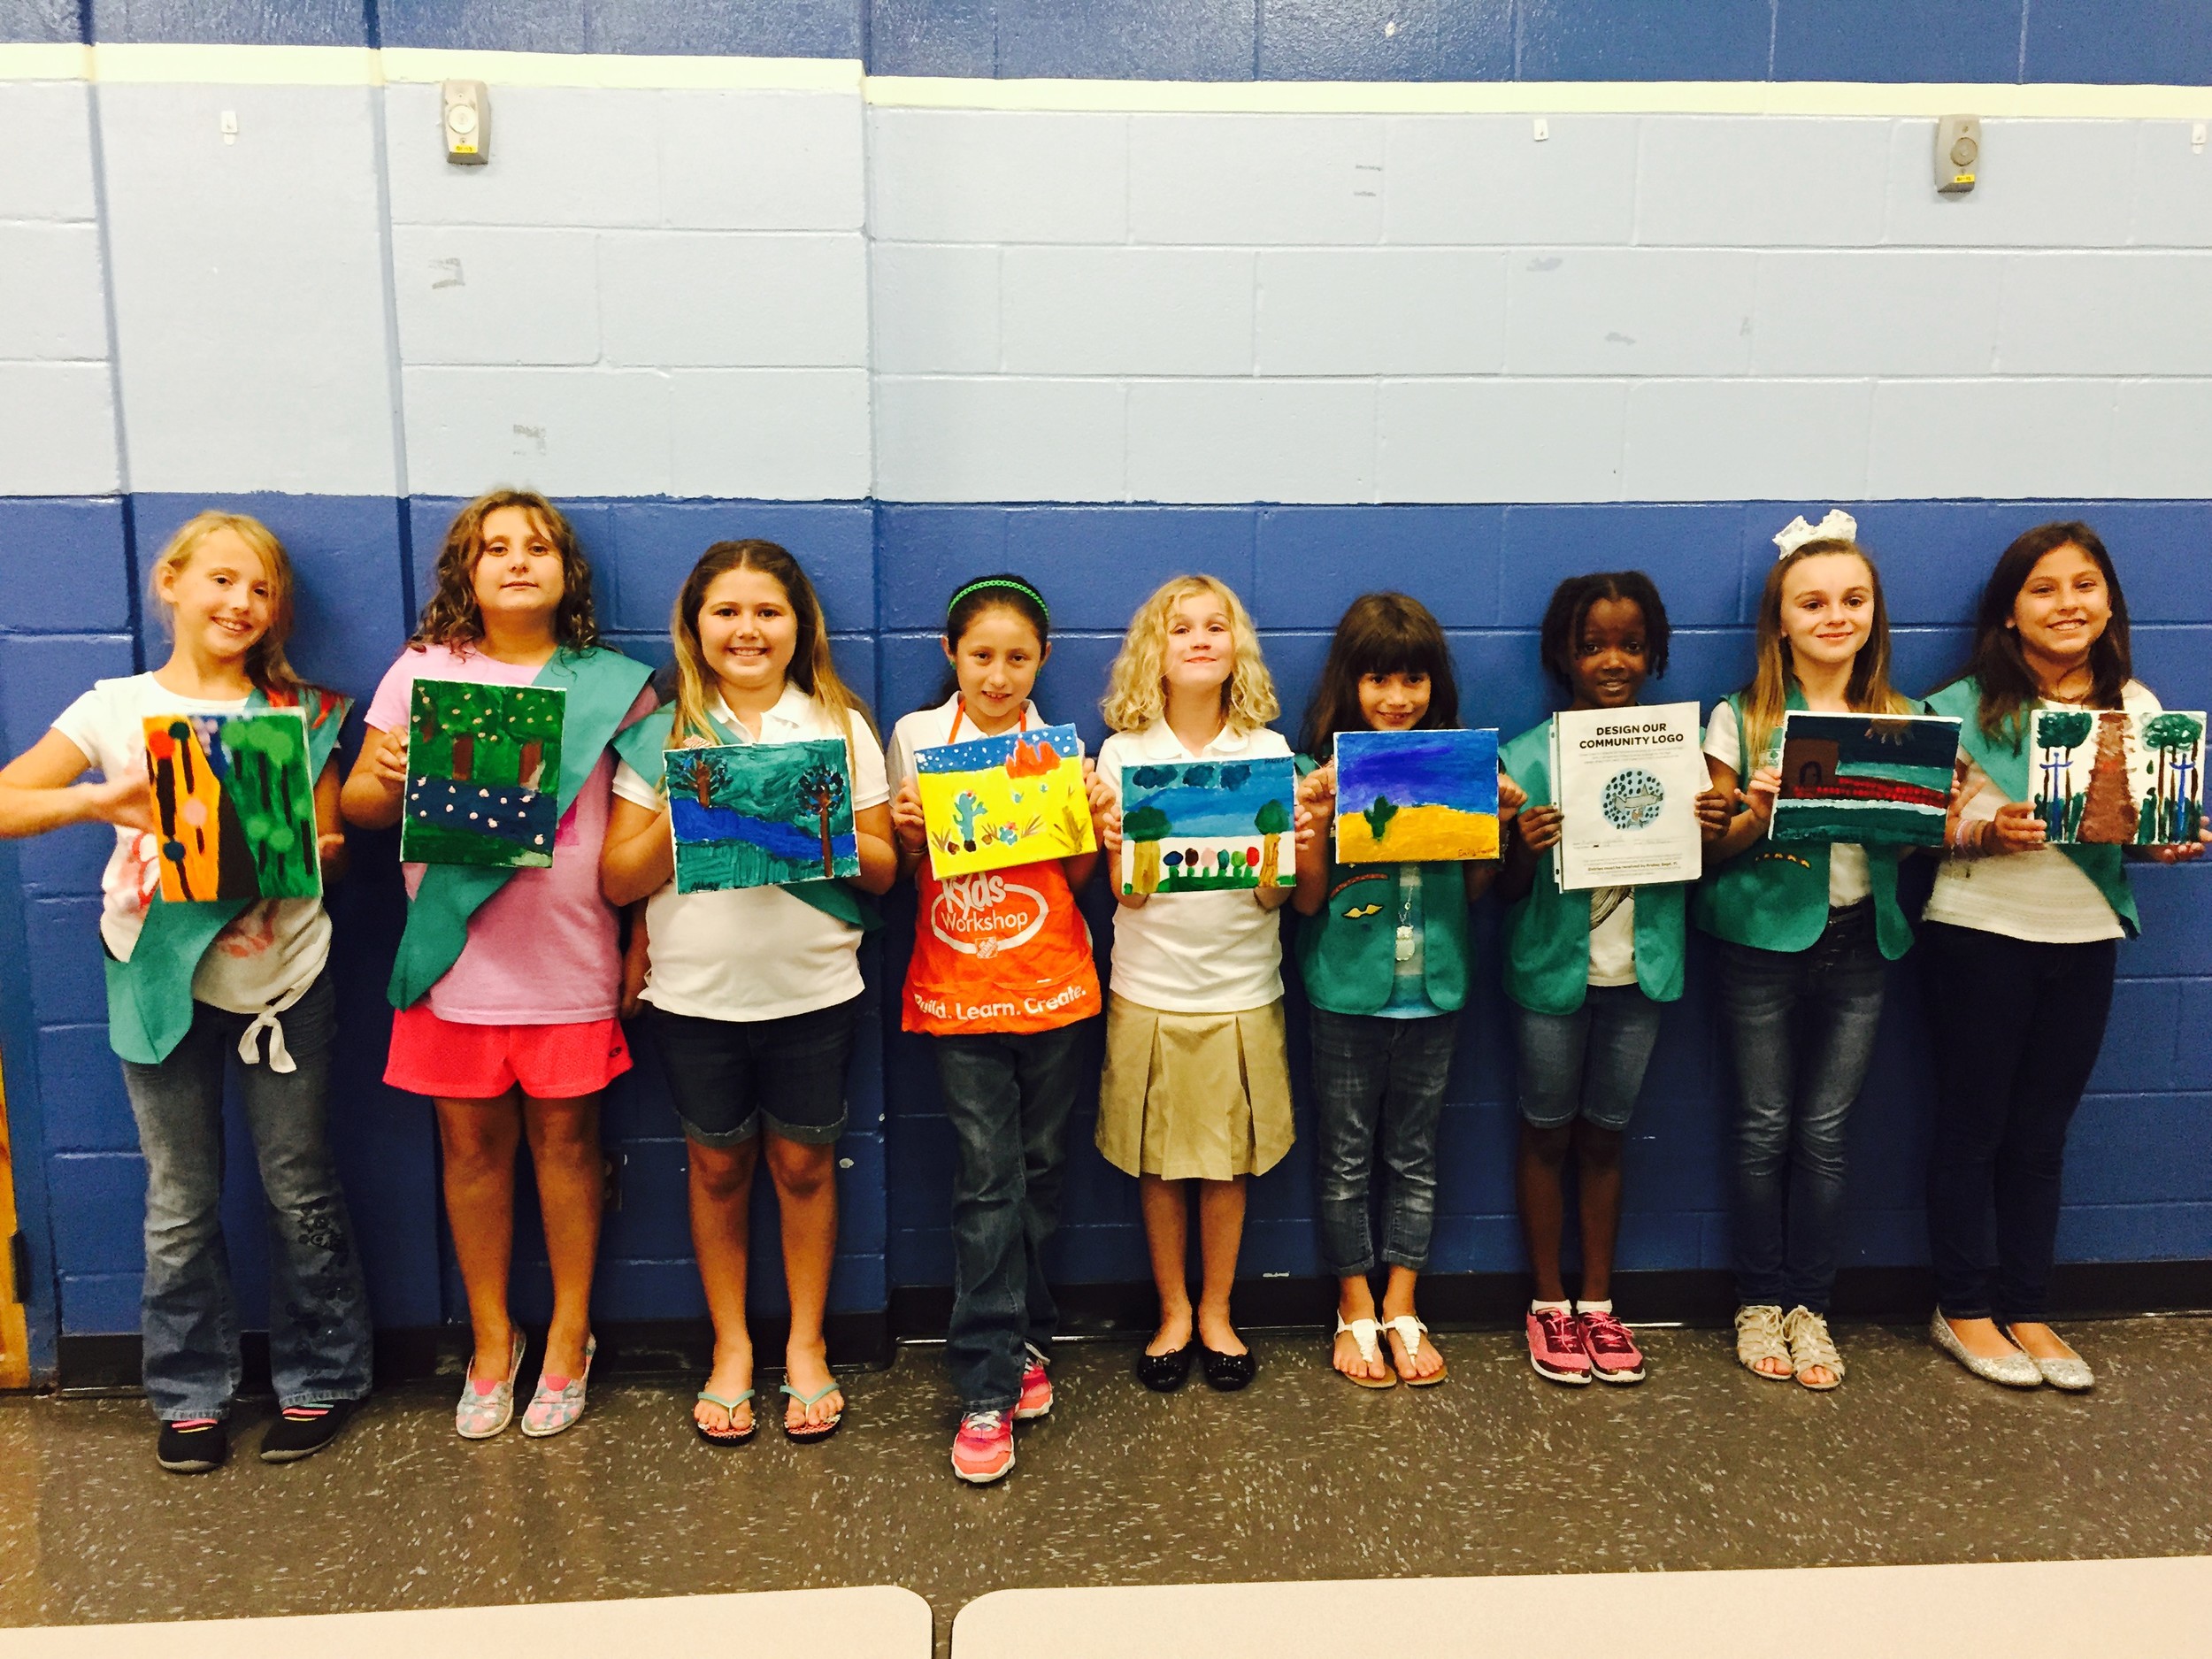 Junior Troop 138 earned their Drawing badge by learning how to use acrylics on canvas, as well as chalk, pastels and water painting. The girls did an art gallery exposition at Mill Creek Elementary school. From left to right: Dakota Moores, Piper White, Abbey Eiseman, Catalina Martinez-Wittinghan, Maddie Badger, Emily Favorite, Audrey Leveille, Olivia Hill & Victoria Lenoir.